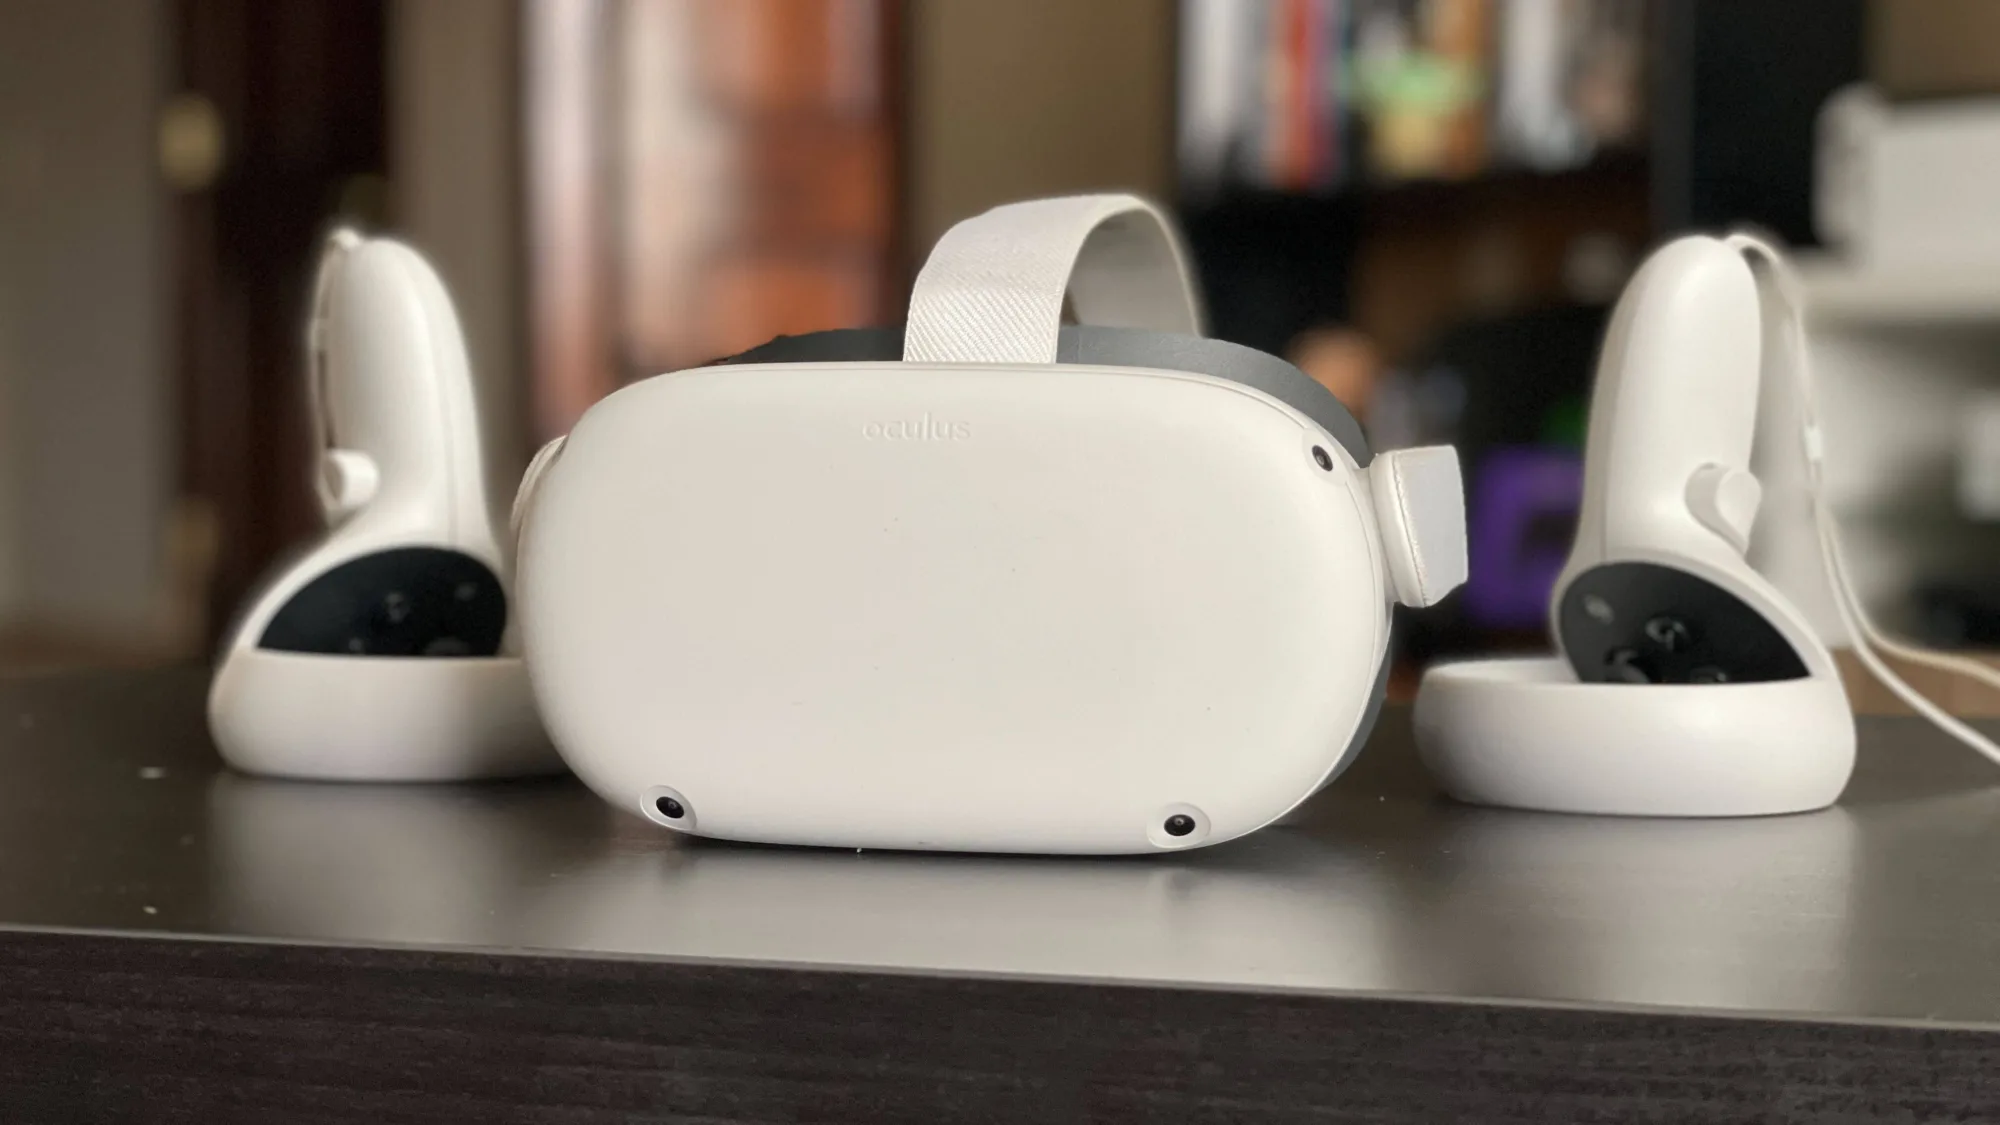 How to Change Height in the Oculus Quest 2? 1